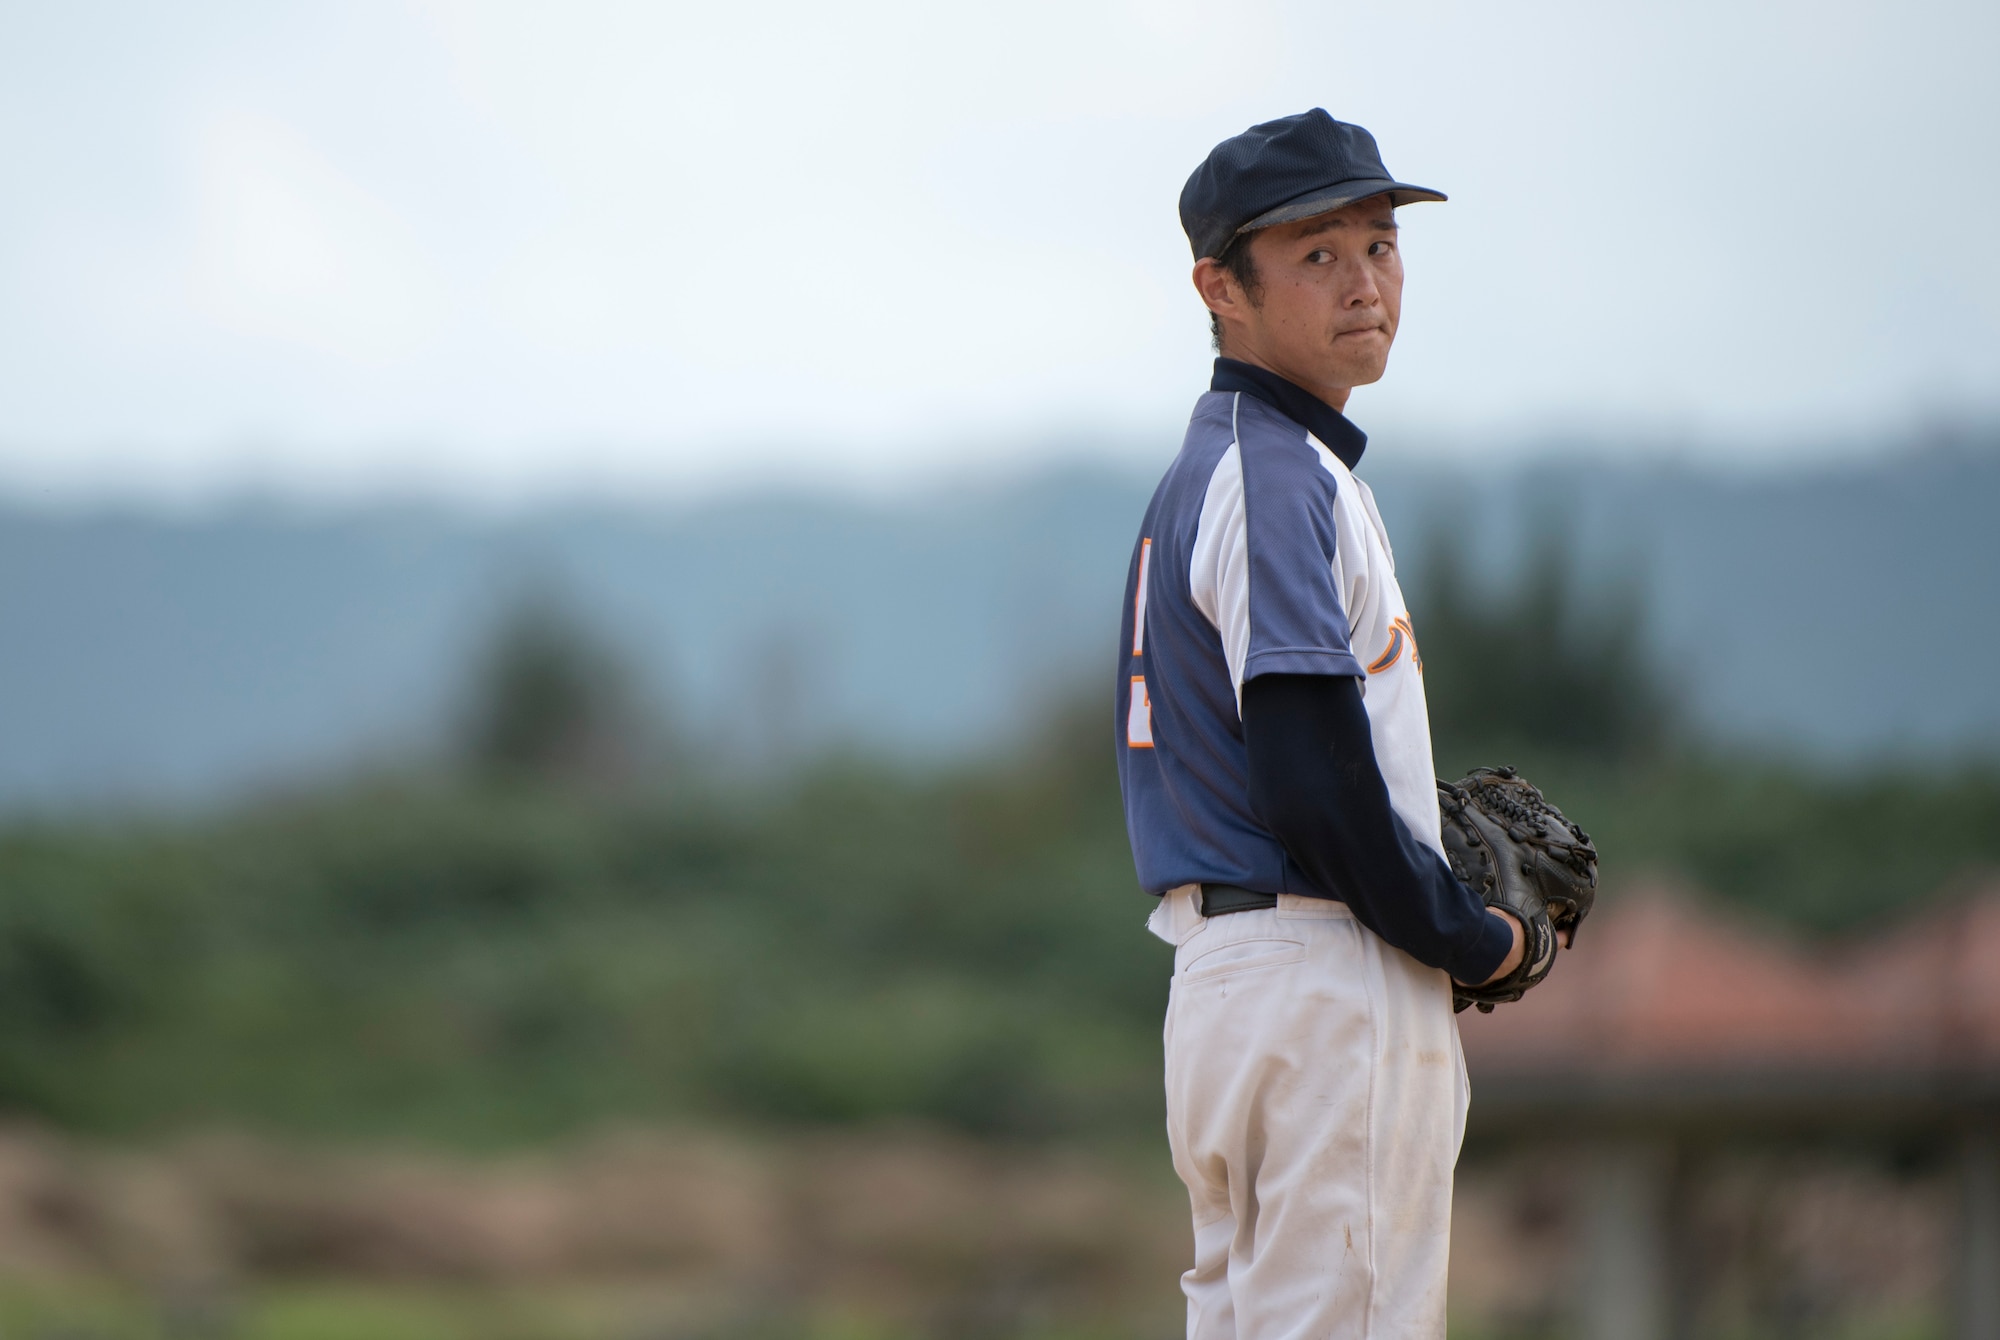 Tommy Sunny, Okinawa Prefectural Government’s baseball team pitcher, focuses before throwing a pitch during a game Nov. 19, 2016, at a baseball field in Naha, Japan. The Okinawa Prefectural Government defeated the Allstars 15-5 in a nine-inning game. (U.S. Air Force photo by Senior Airman Omari Bernard/Released)